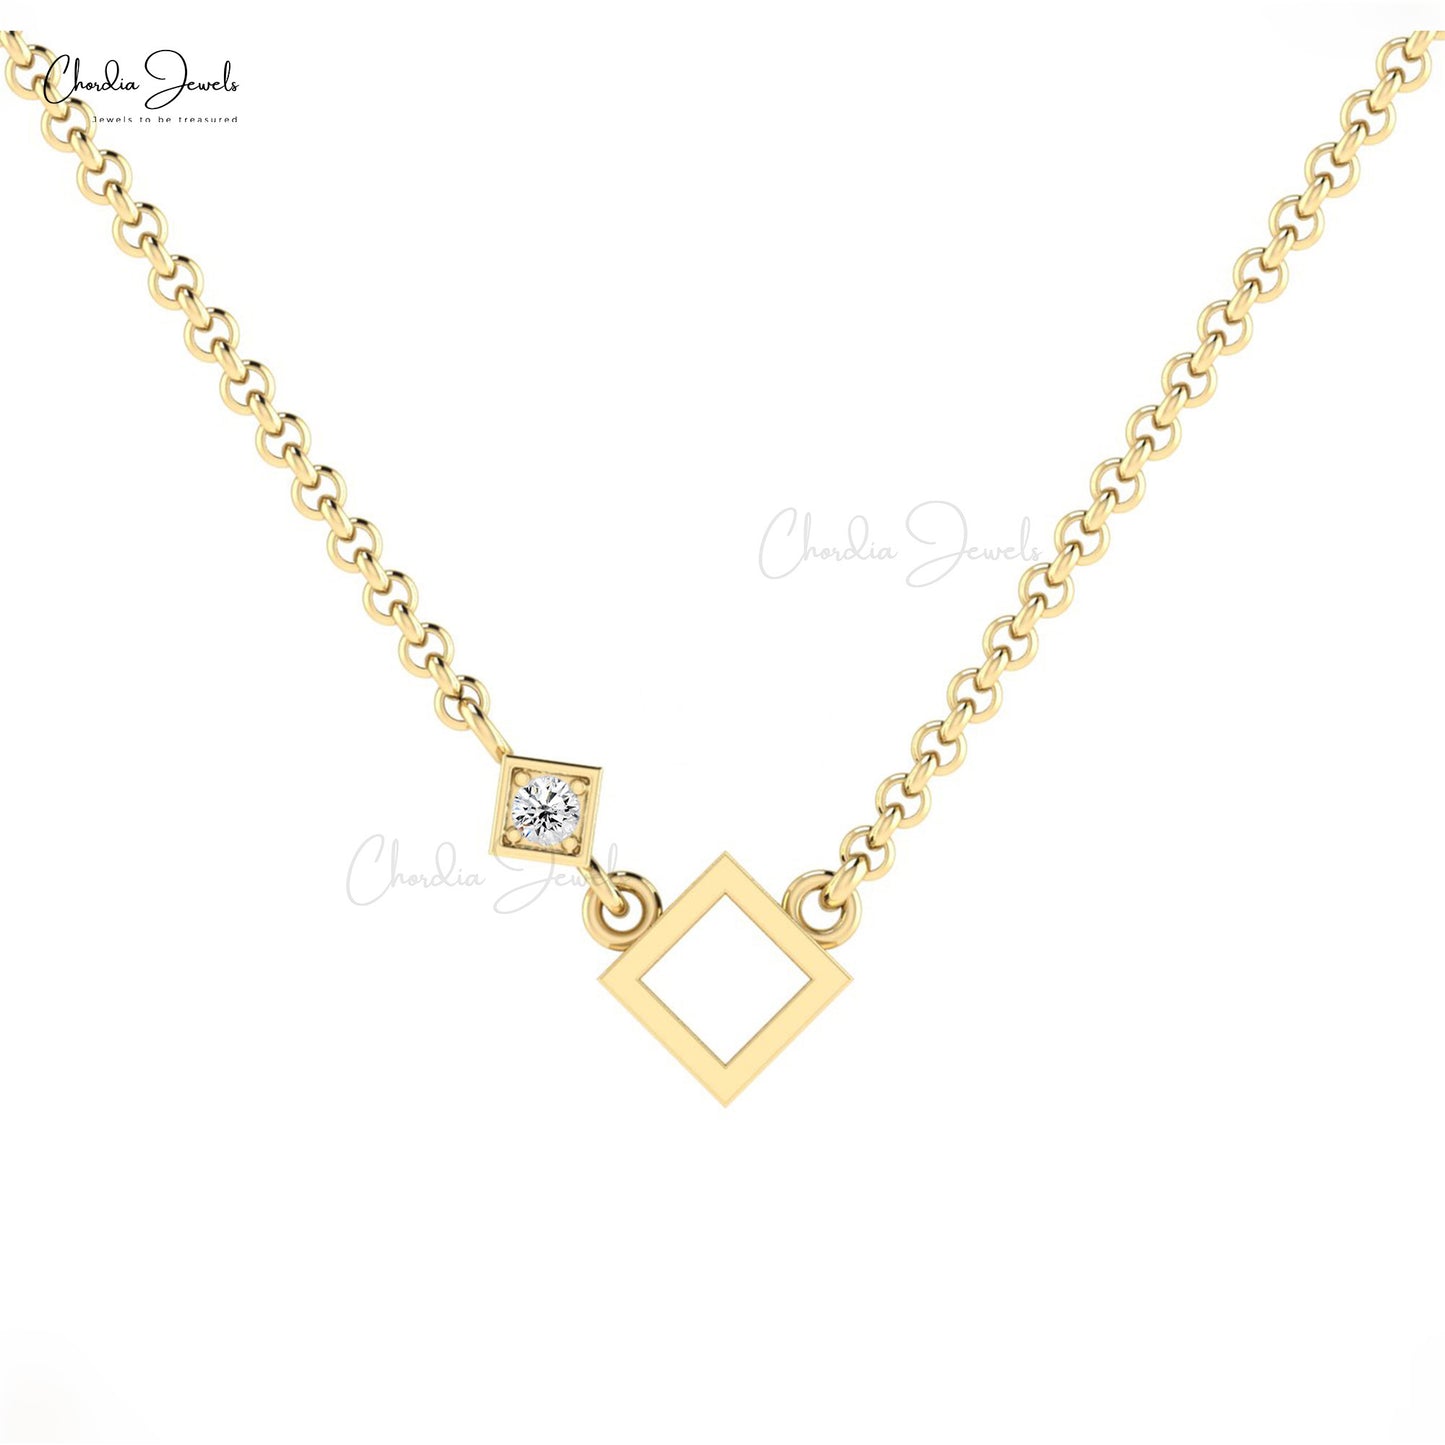 High Quality Antique Luxury Natural White Diamond Open Square Necklace Pendant With Spring Ring Closure 14k Solid Gold Necklace Wedding Gift